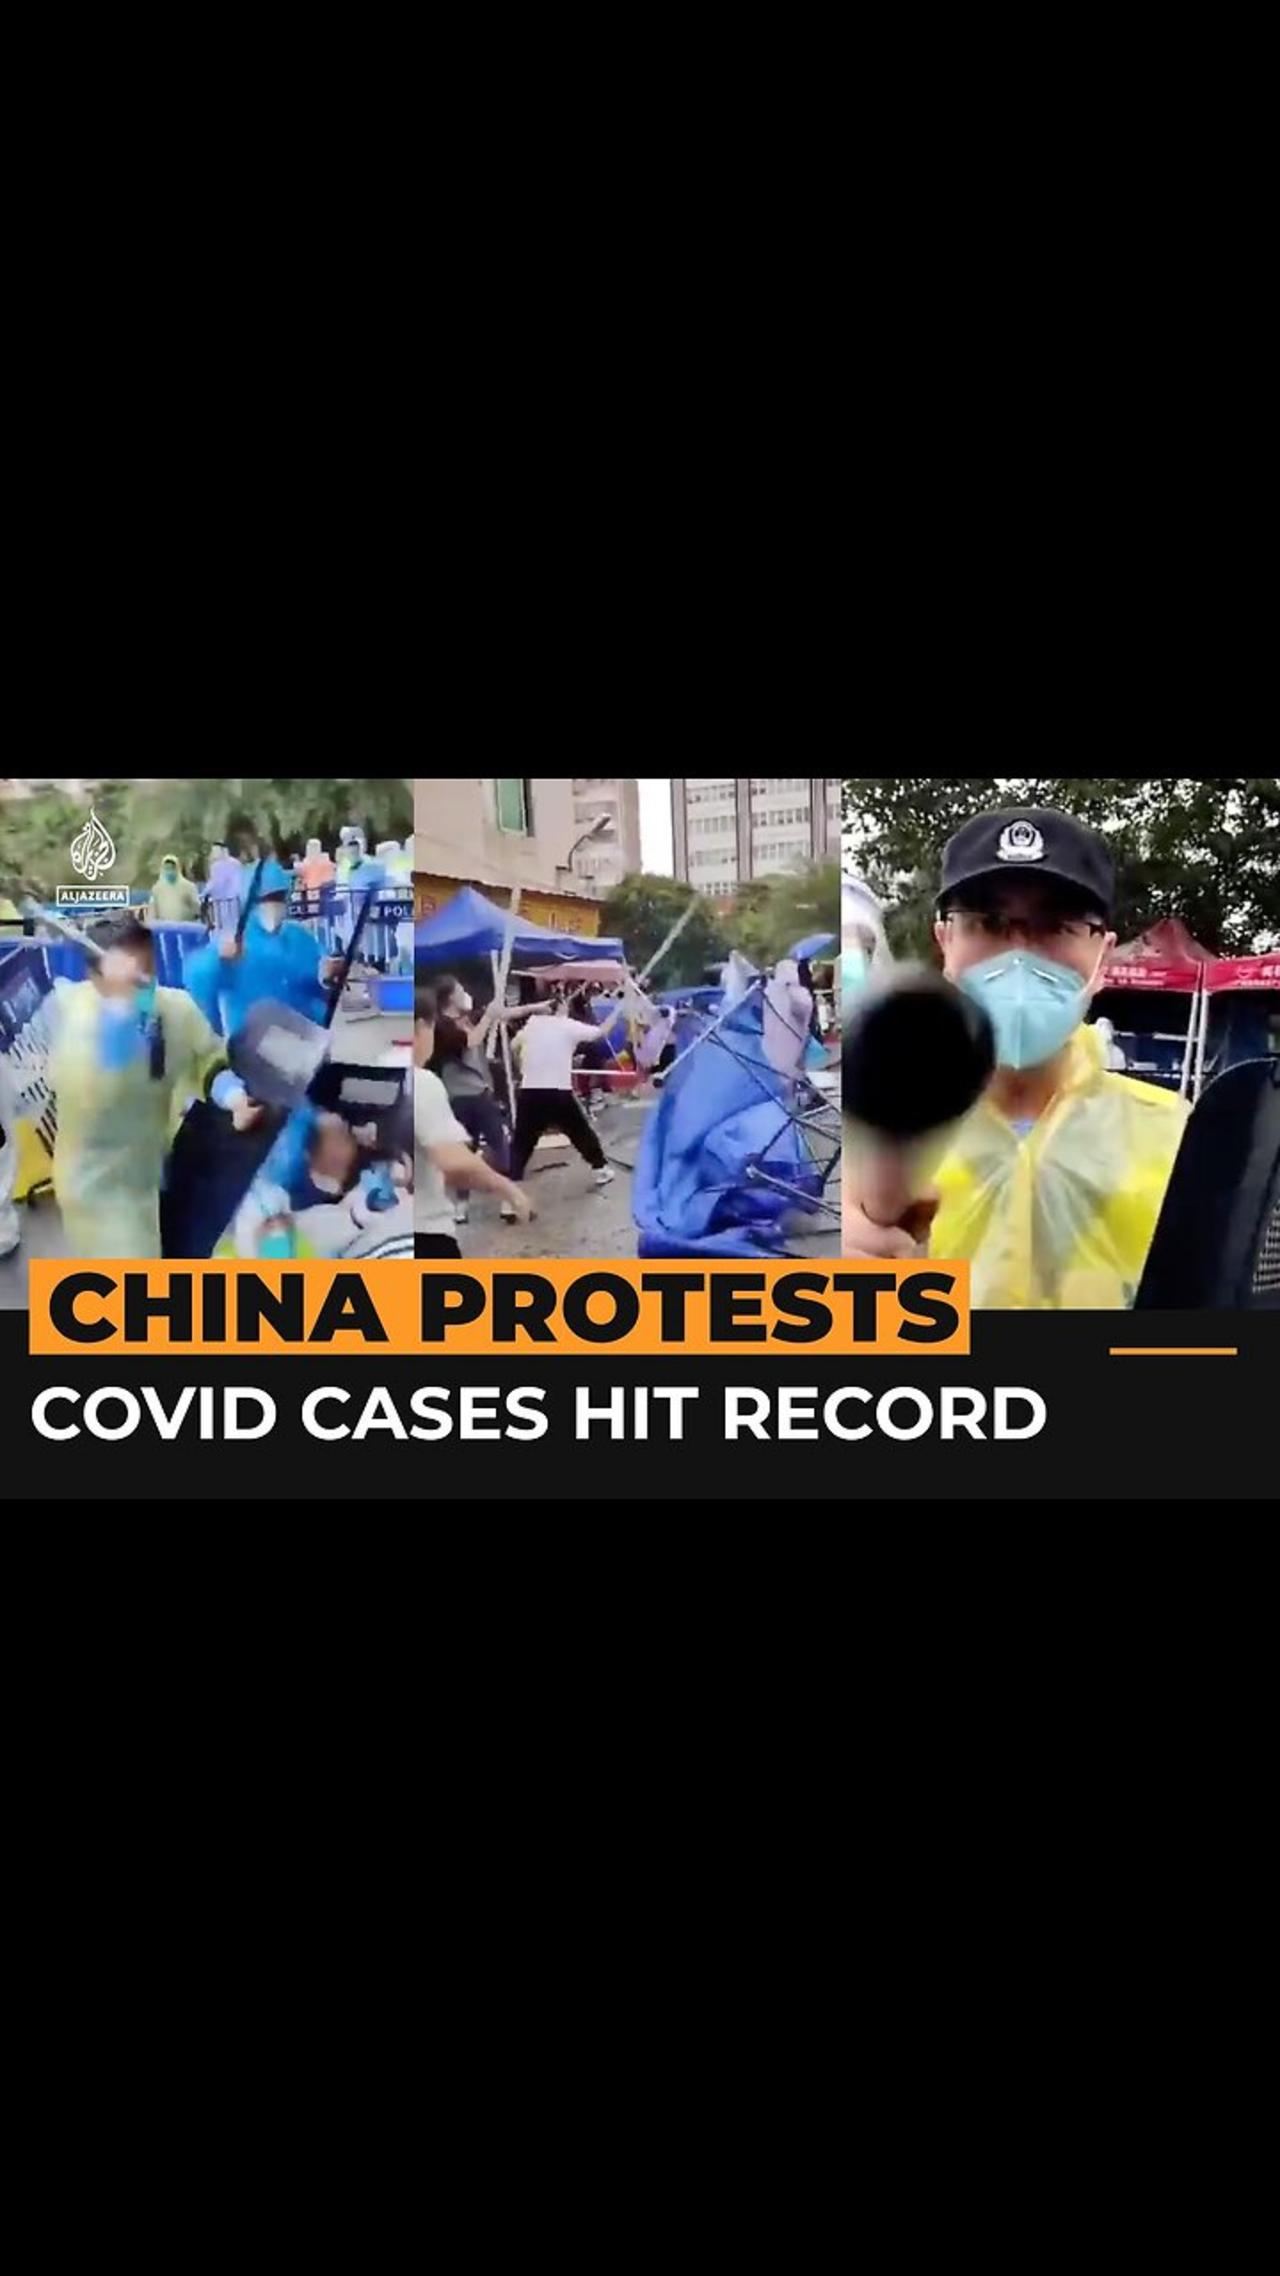 New protests in China as COVID cases hit new high | Al Jazeera Newsfeed